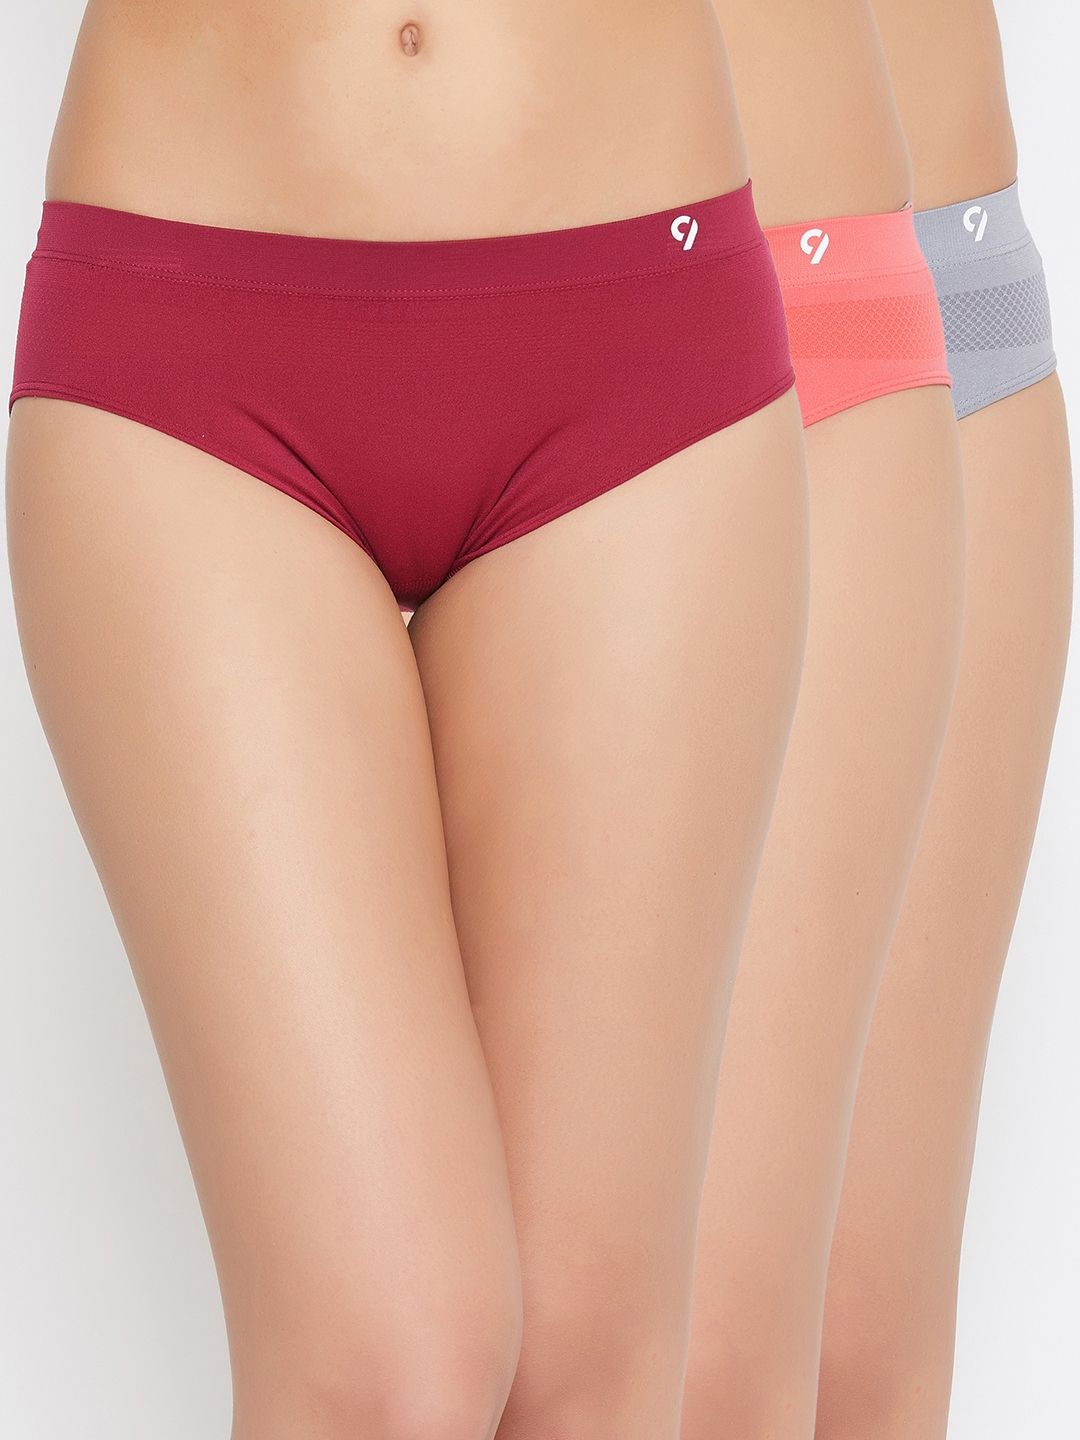 Buy C9 Airwear Women Mid Rise Strape Panty Pack of 3 - Multi-Color